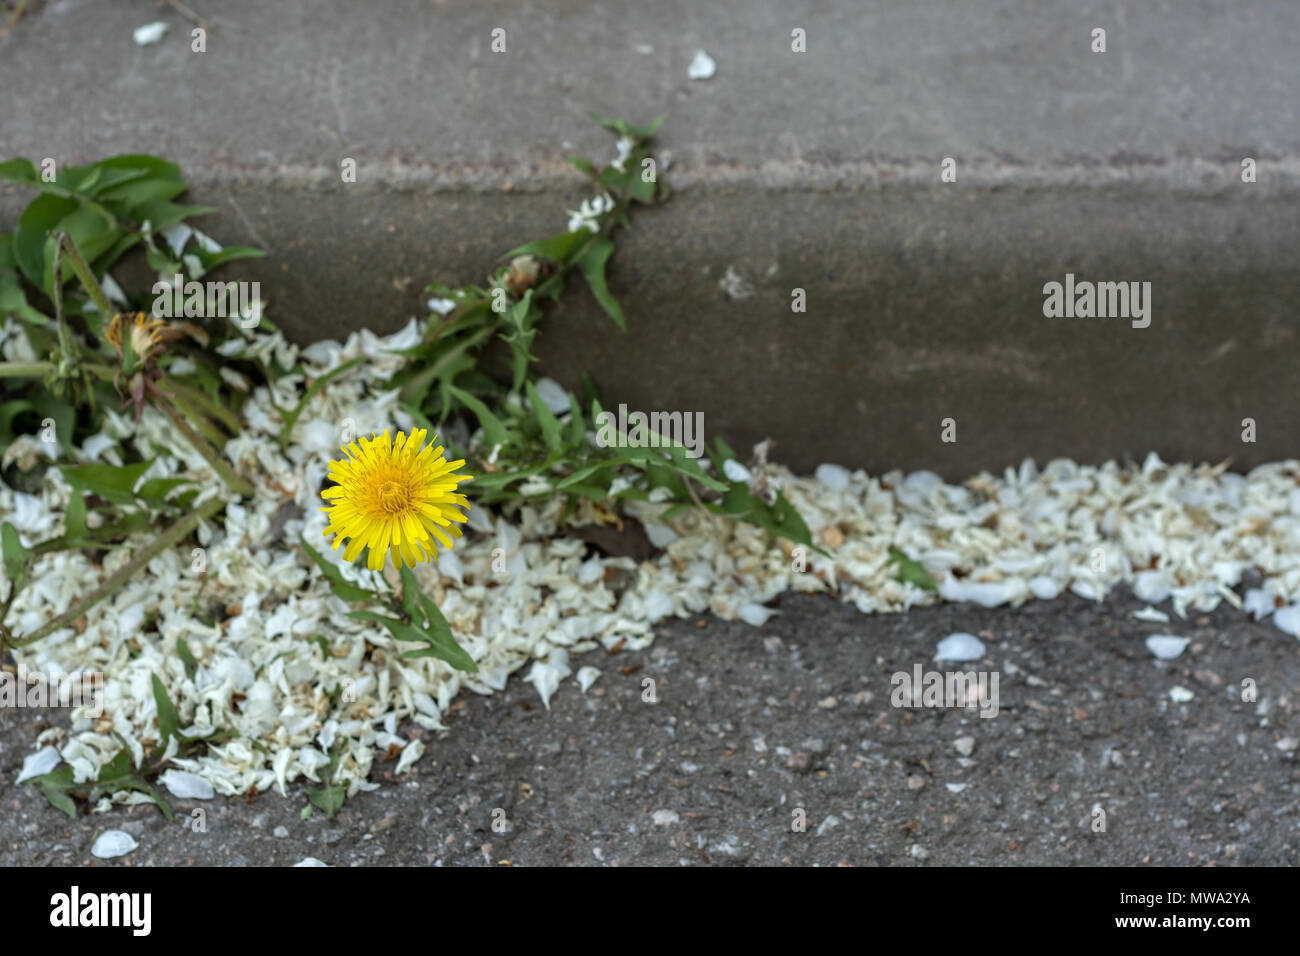 Sprouted through the asphalt on the sidewalk with a curb the flower of a yellow dandelion among the fallen white lilac petals. Stock Photo